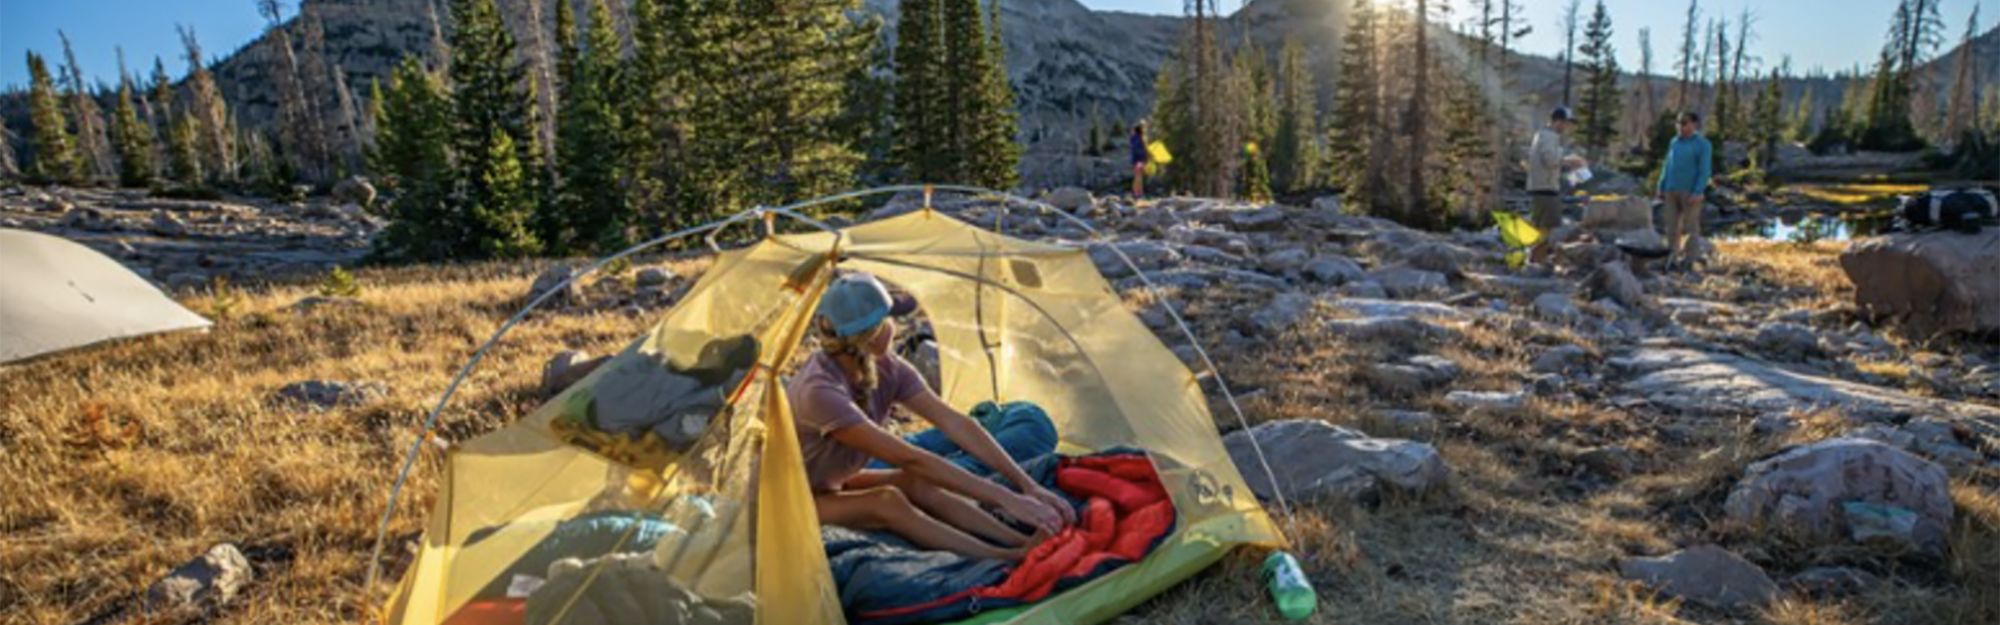 REI Sale 2020  Save on Outdoor Gear This Week at REI